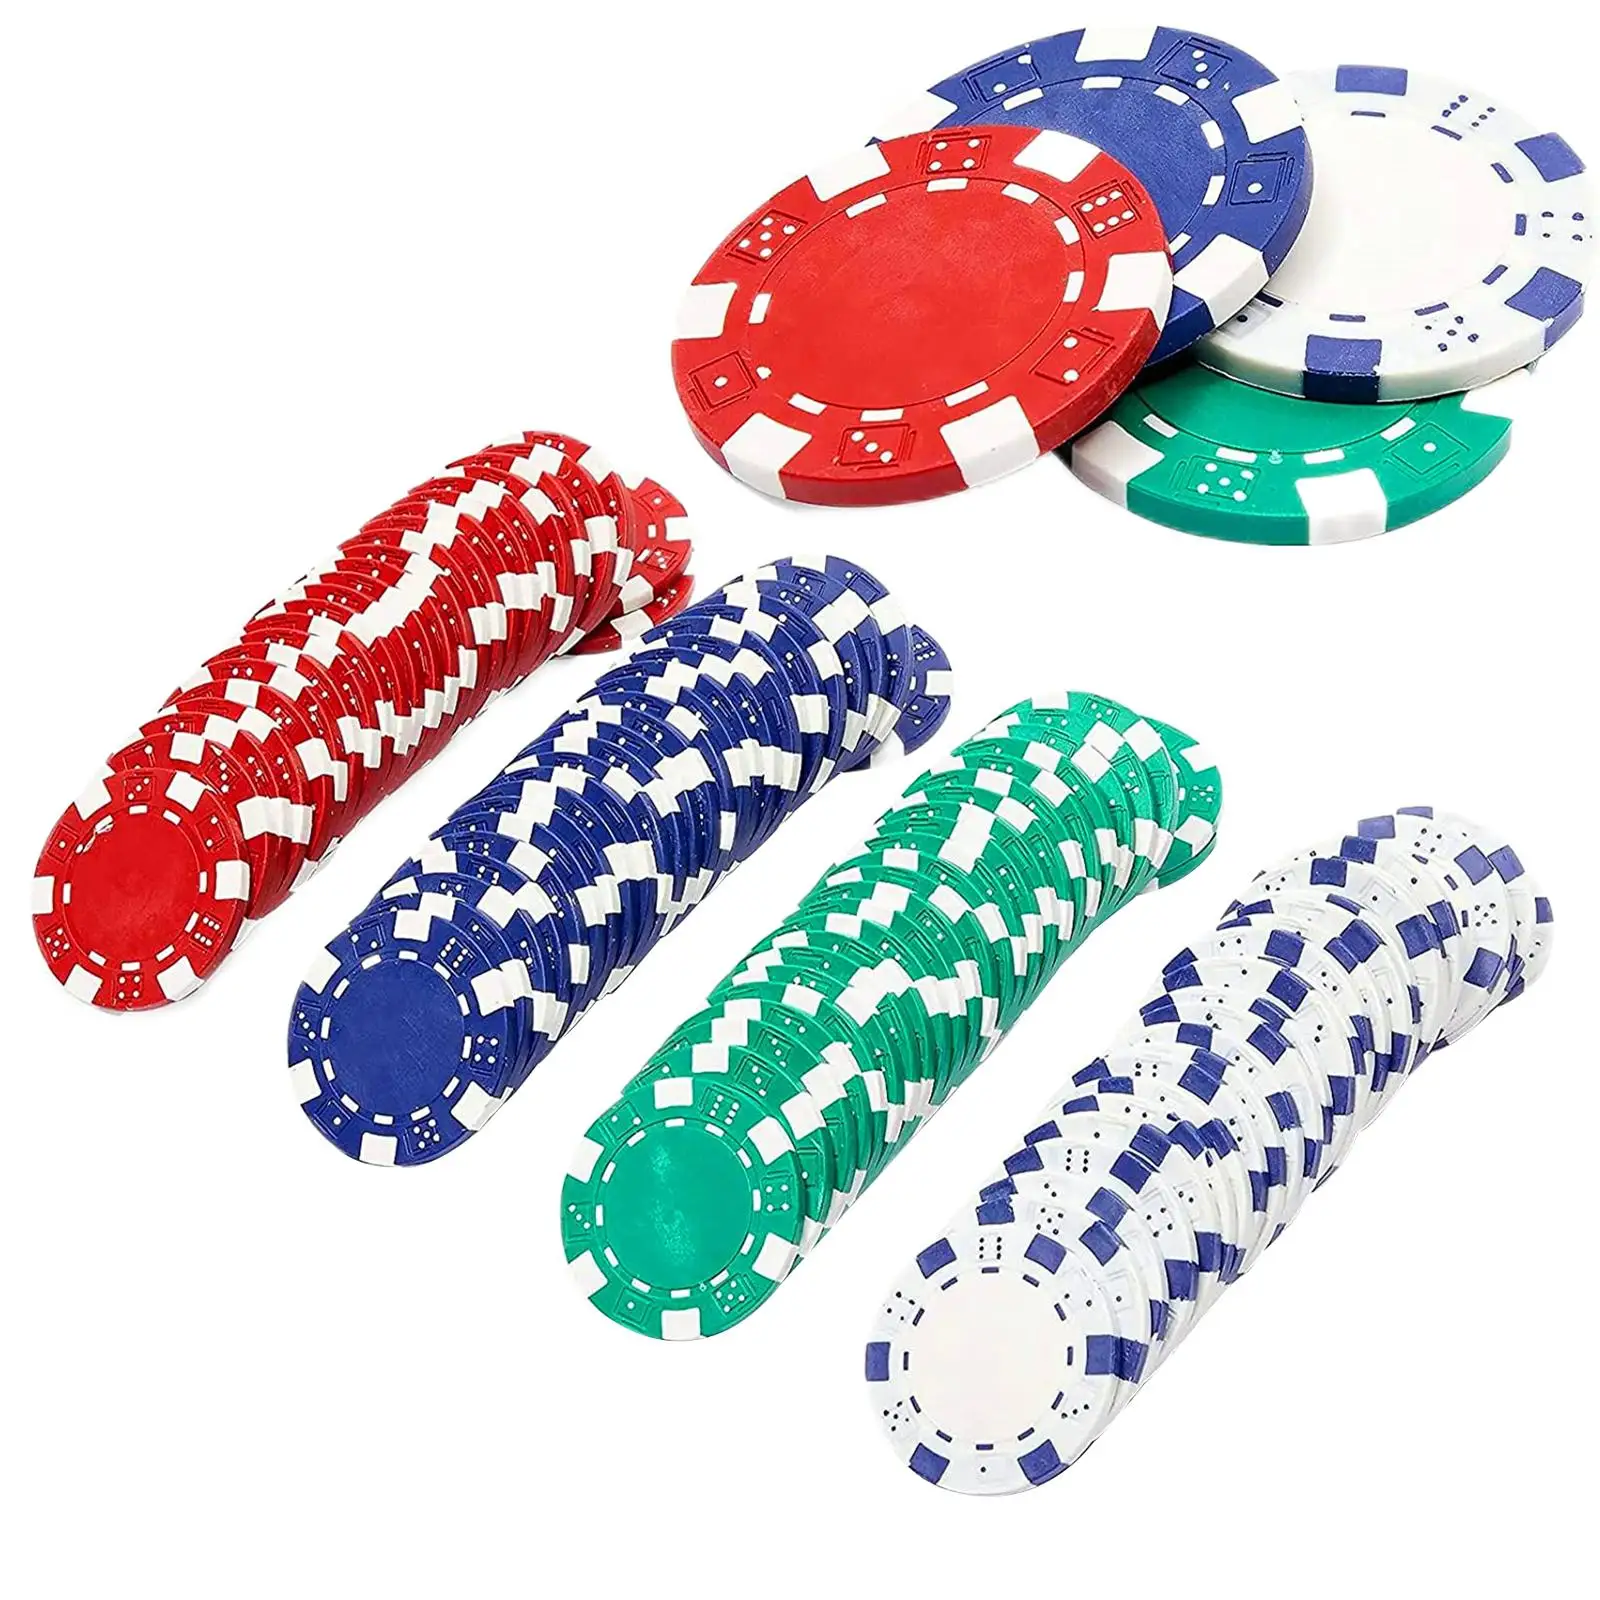 100x ABS Poker Chips Premium Durable Game Tokens Counting Discs Bingo Chips